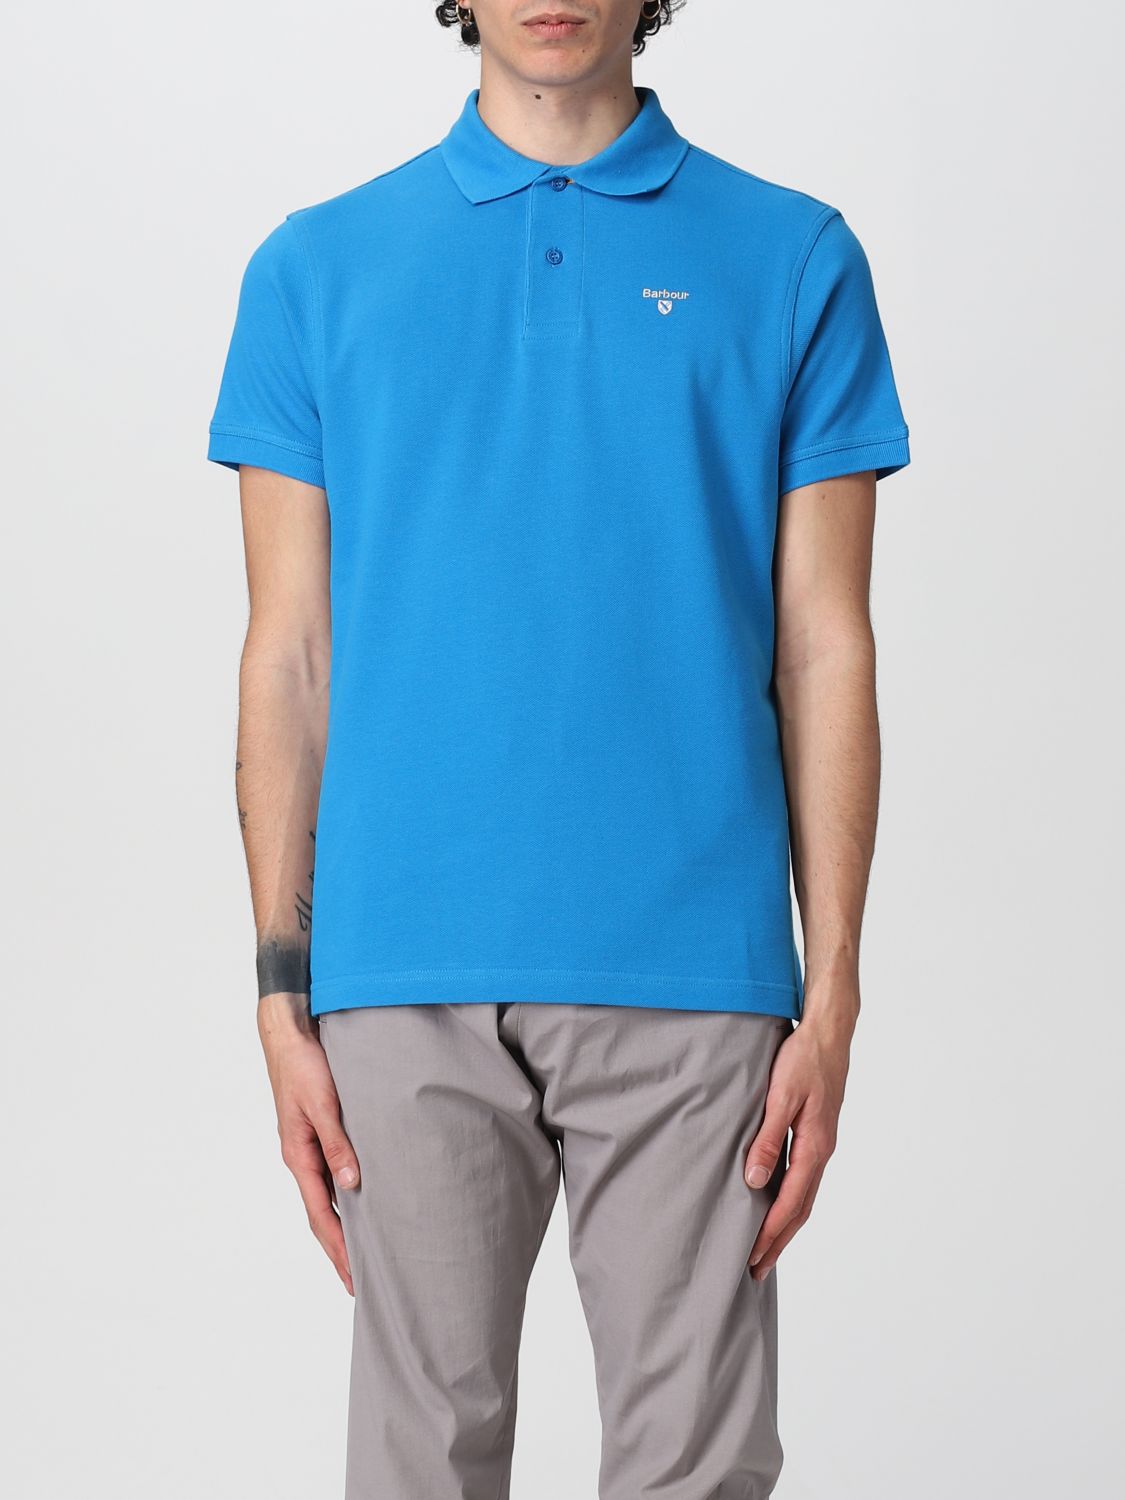 polo for - Blue | Barbour polo shirt MML0358 at GIGLIO.COM